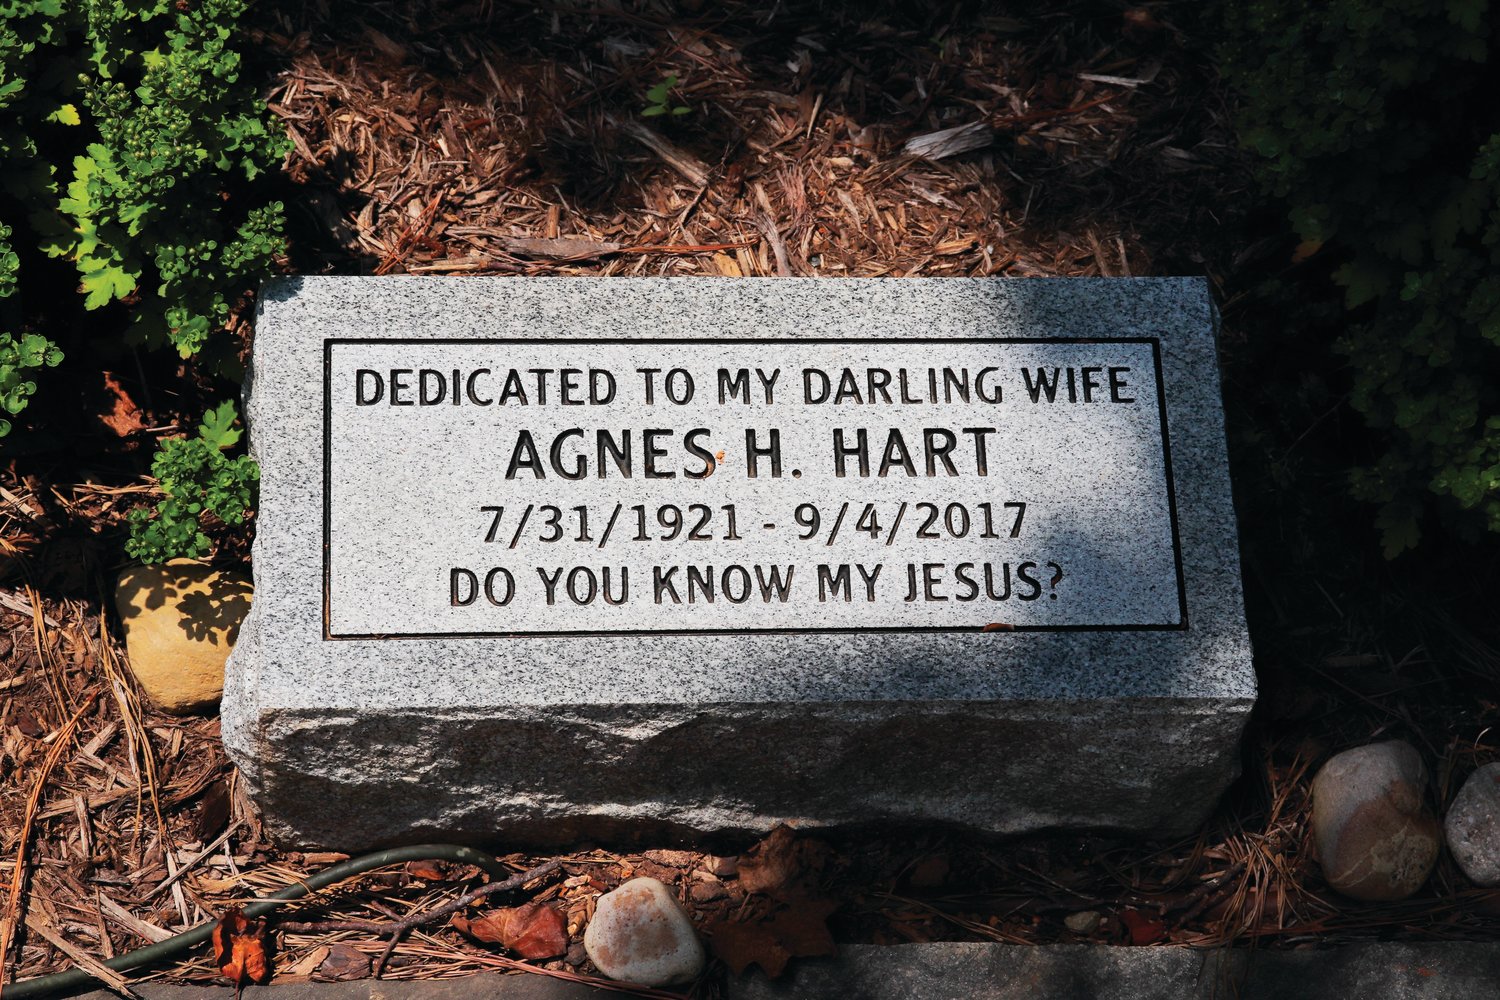 A stone Wesley Hart had made for his late wife, who died a month before the couple's 75th anniversary. The quote on the marker — 'Do you know my Jesus?' — is something Agnes Hart would ask everyone who visited their home. The marker is part of a memorial Hart erected at his home.